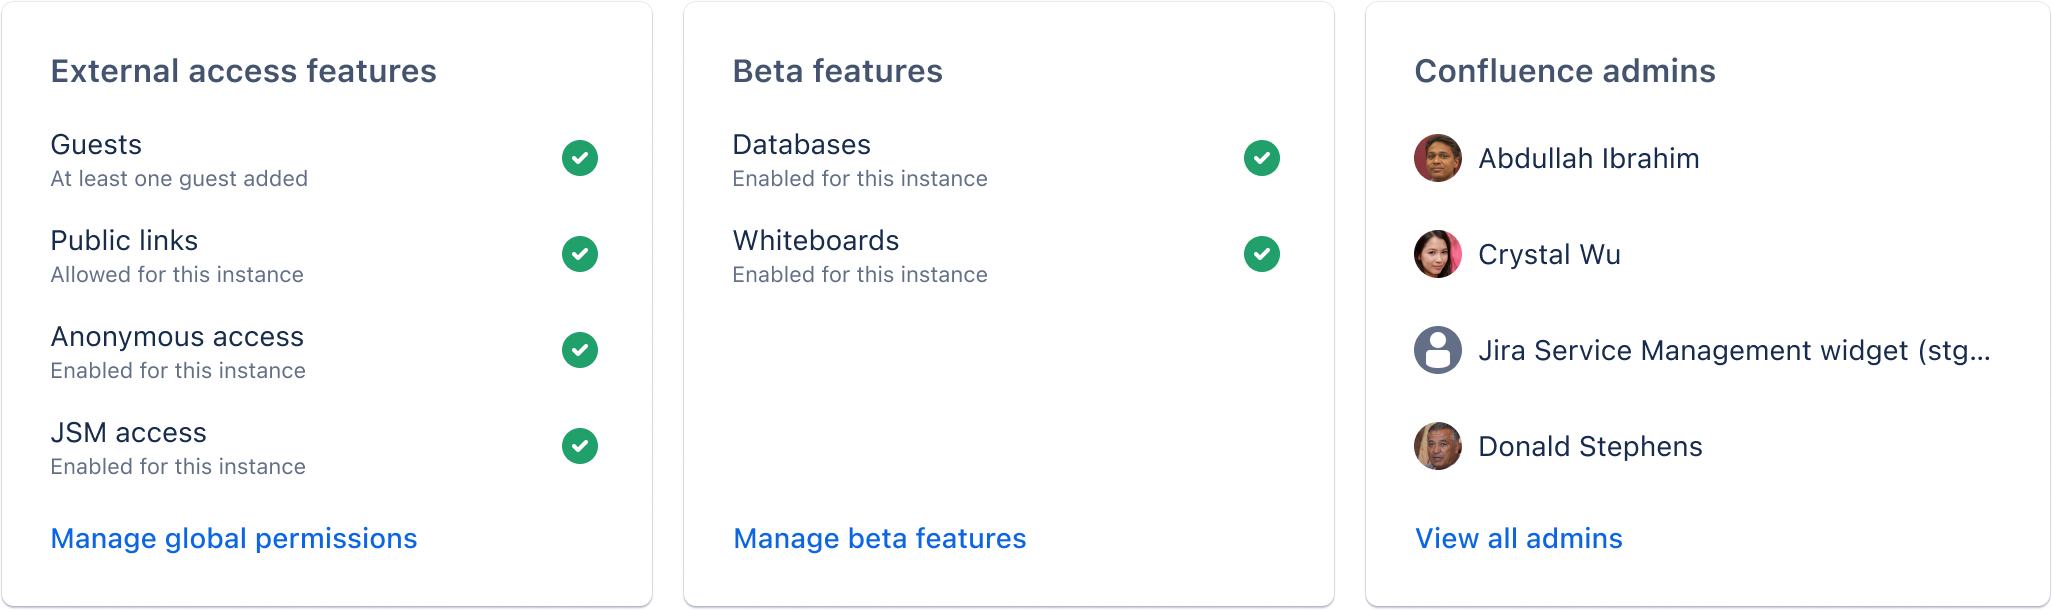 Three summary cards list available external access features, beta features, and Confluence admins. All features are enabled.